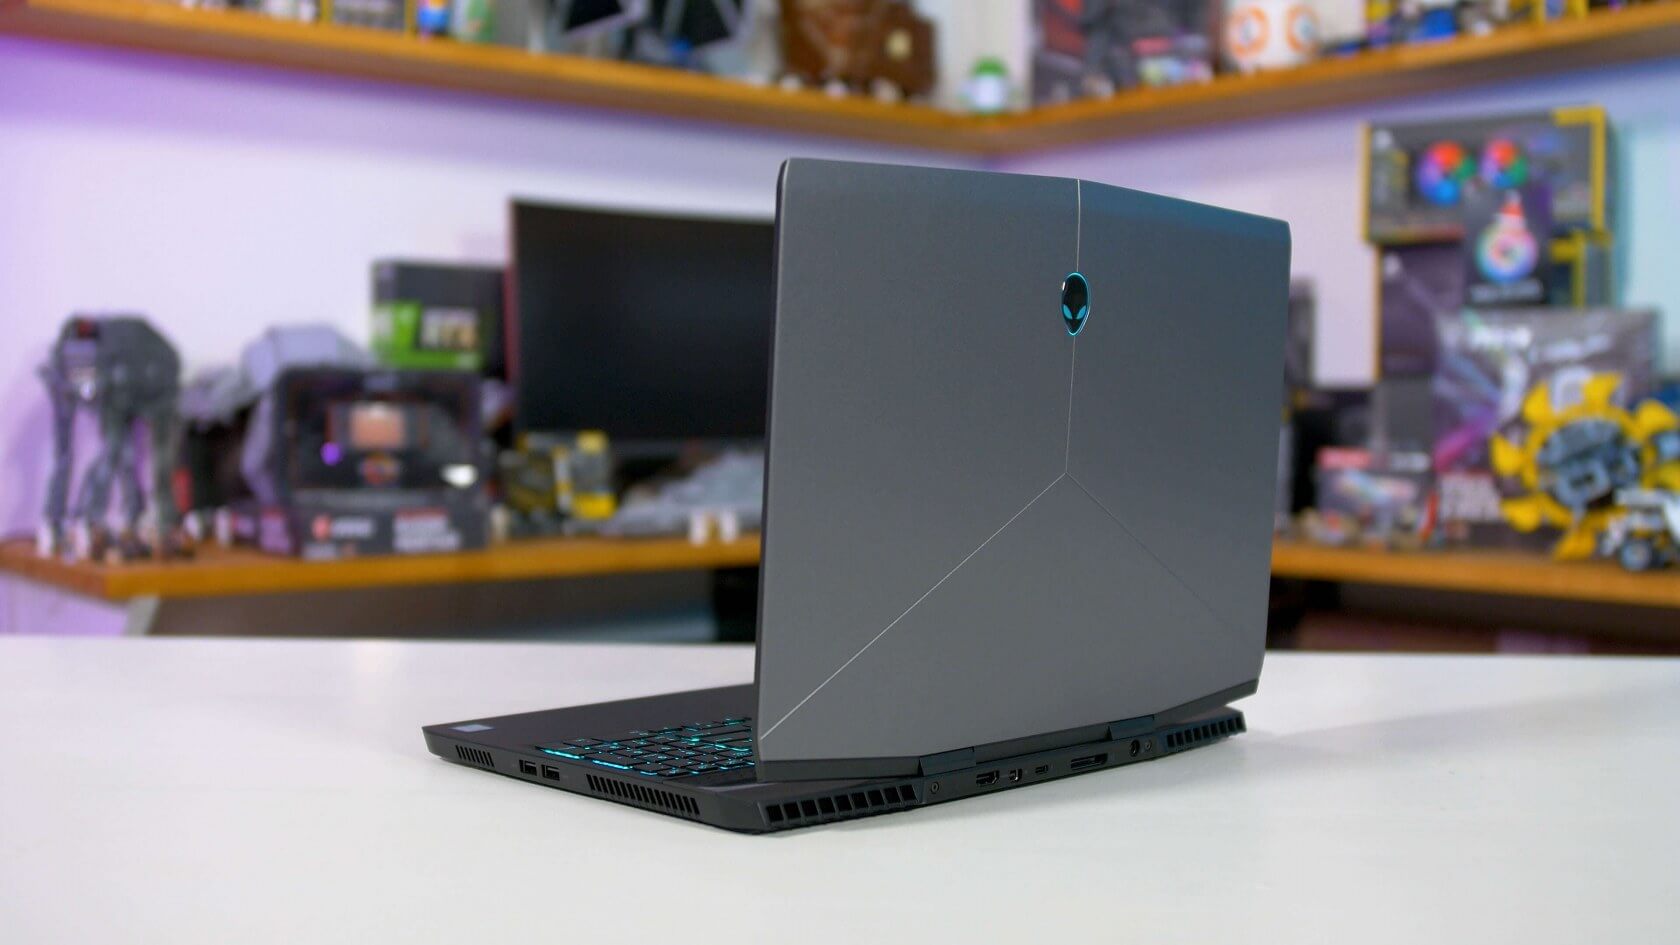 Tech and E3 2019 gaming deals: Alienware m15 is $600 off, Intel 660p 1TB SSD for $100, tons of PlayStation gear